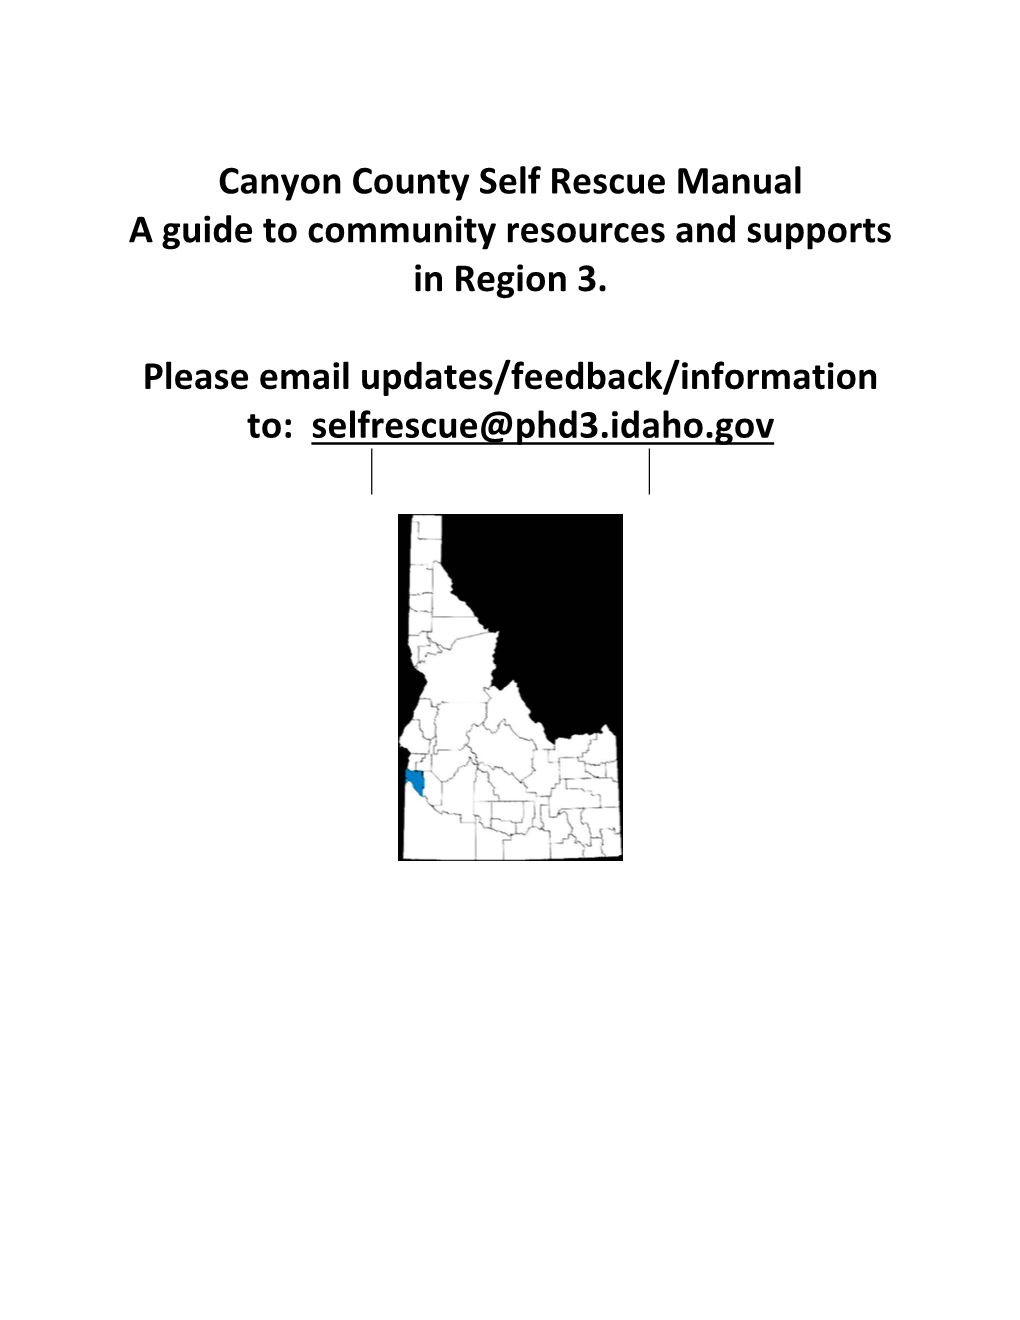 Canyon County Self Rescue Manual a Guide to Community Resources and